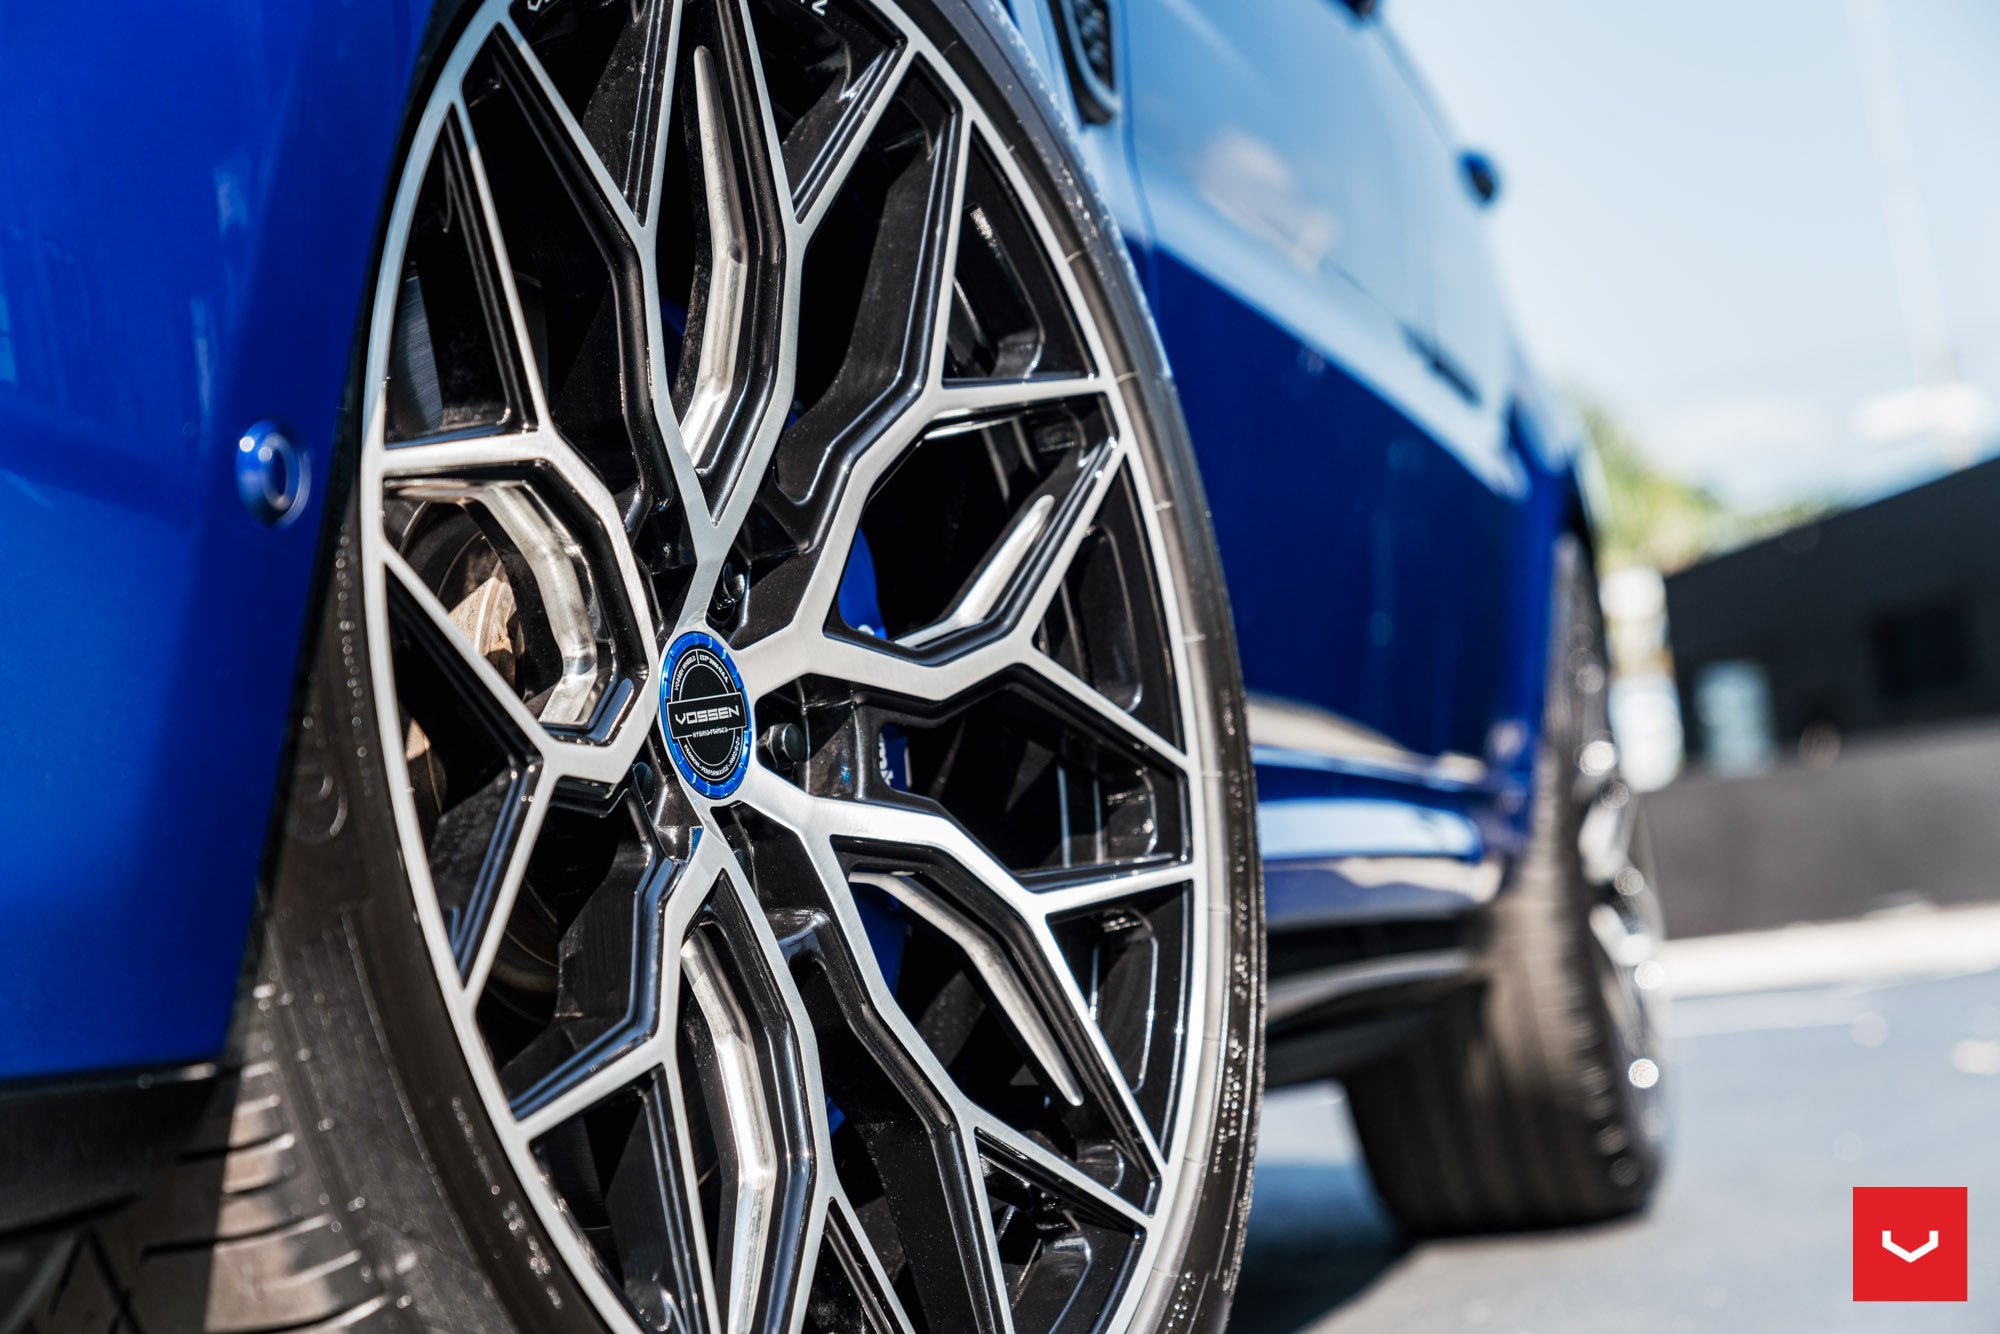 Blue Range Rover Sport with Polished Forged Vossen Rims - Photo by Vossen